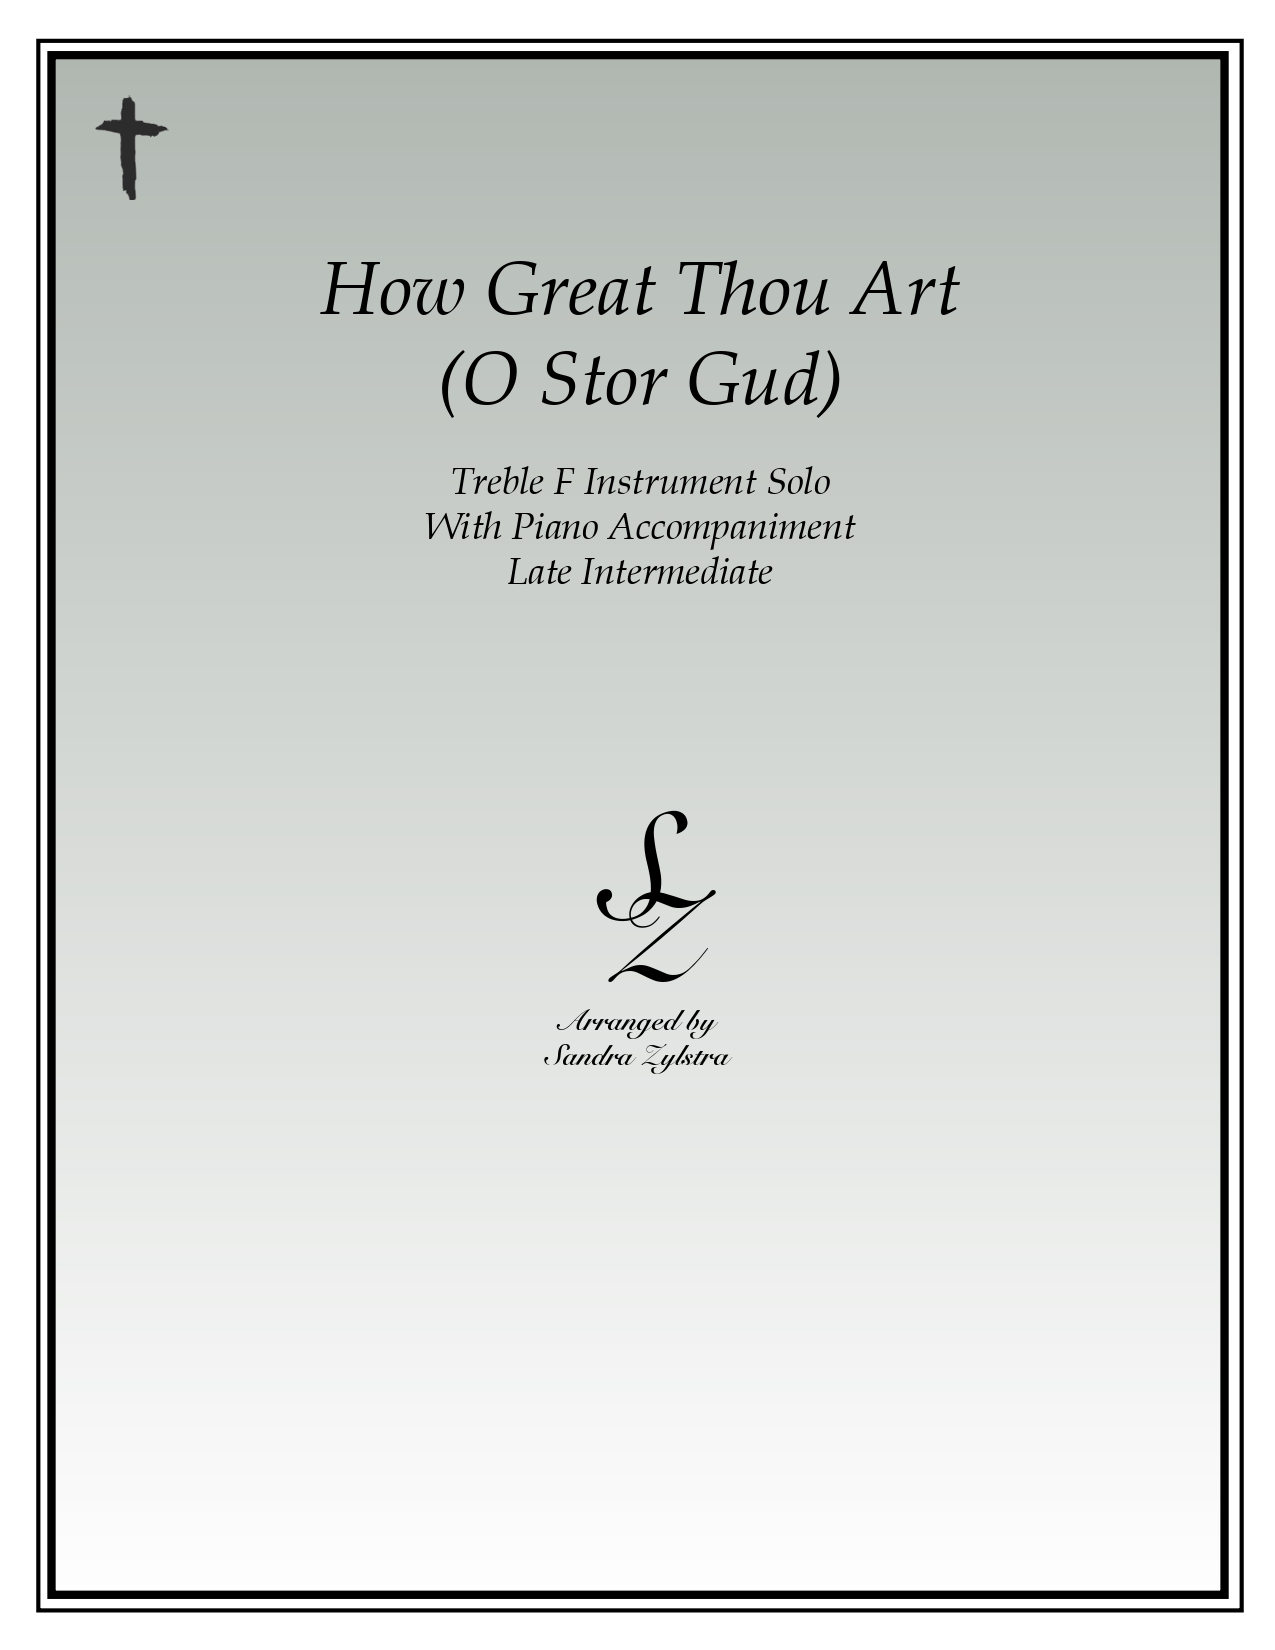 How Great Thou Art F instrument solo part cover page 00011